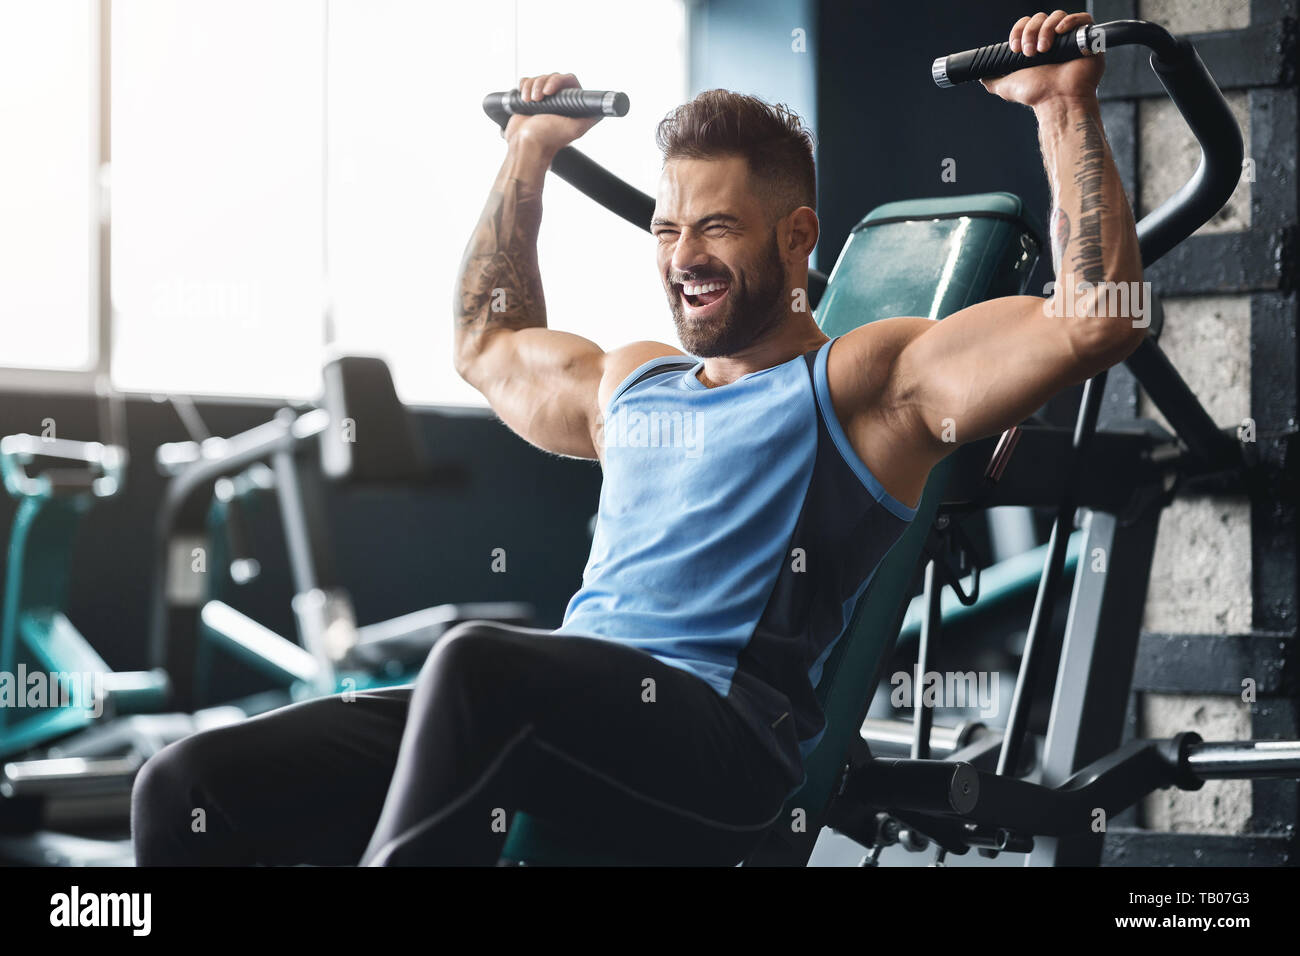 Handsome muscular man working out hard at gym Stock Photo